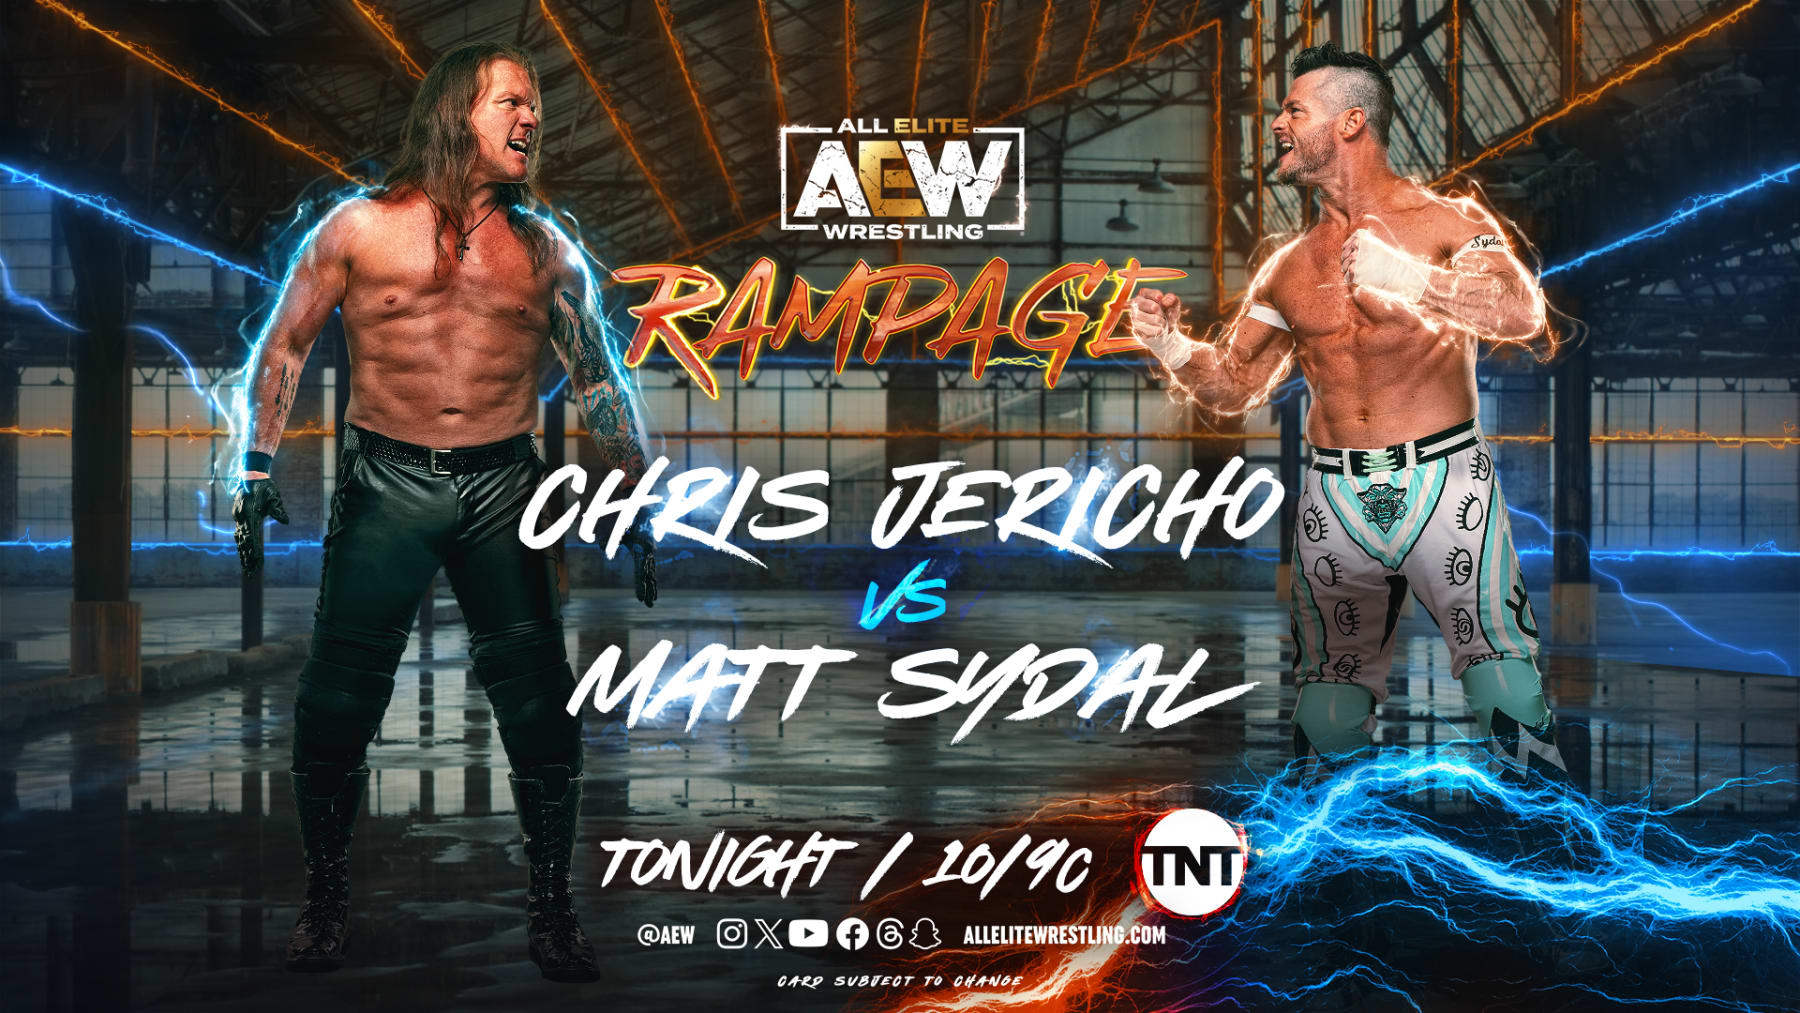 Results, Live Ratings, Reactions, and Highlights from AEW Rampage on January 19